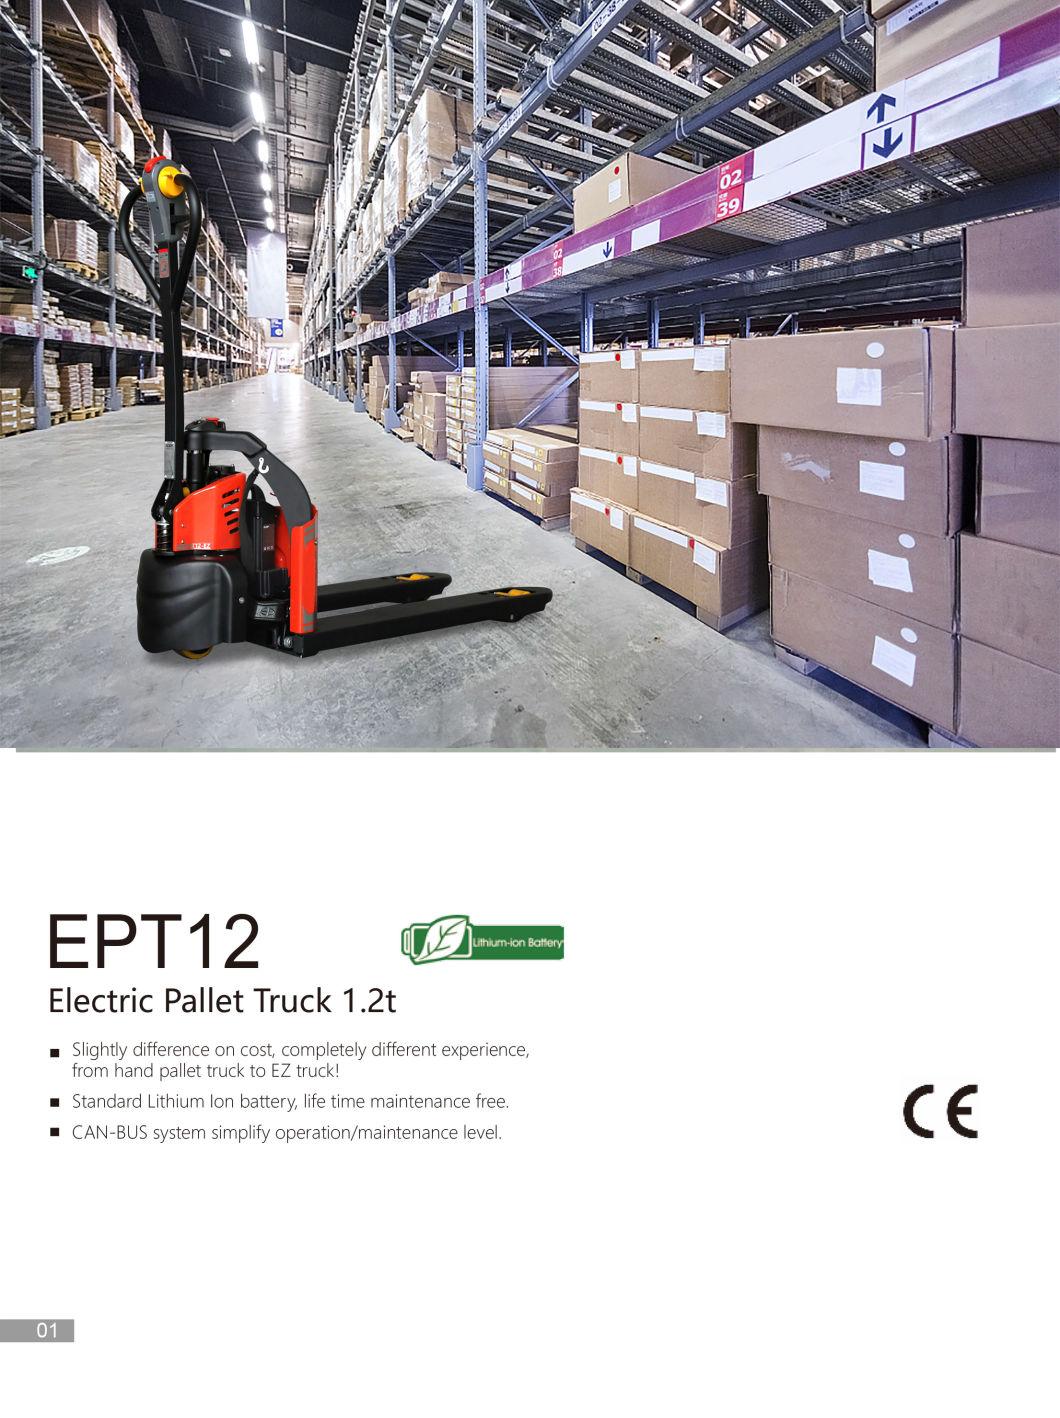 Best Choice 1.5 Ton DC Motor Semi Electric Battery Operated Pallet Truck